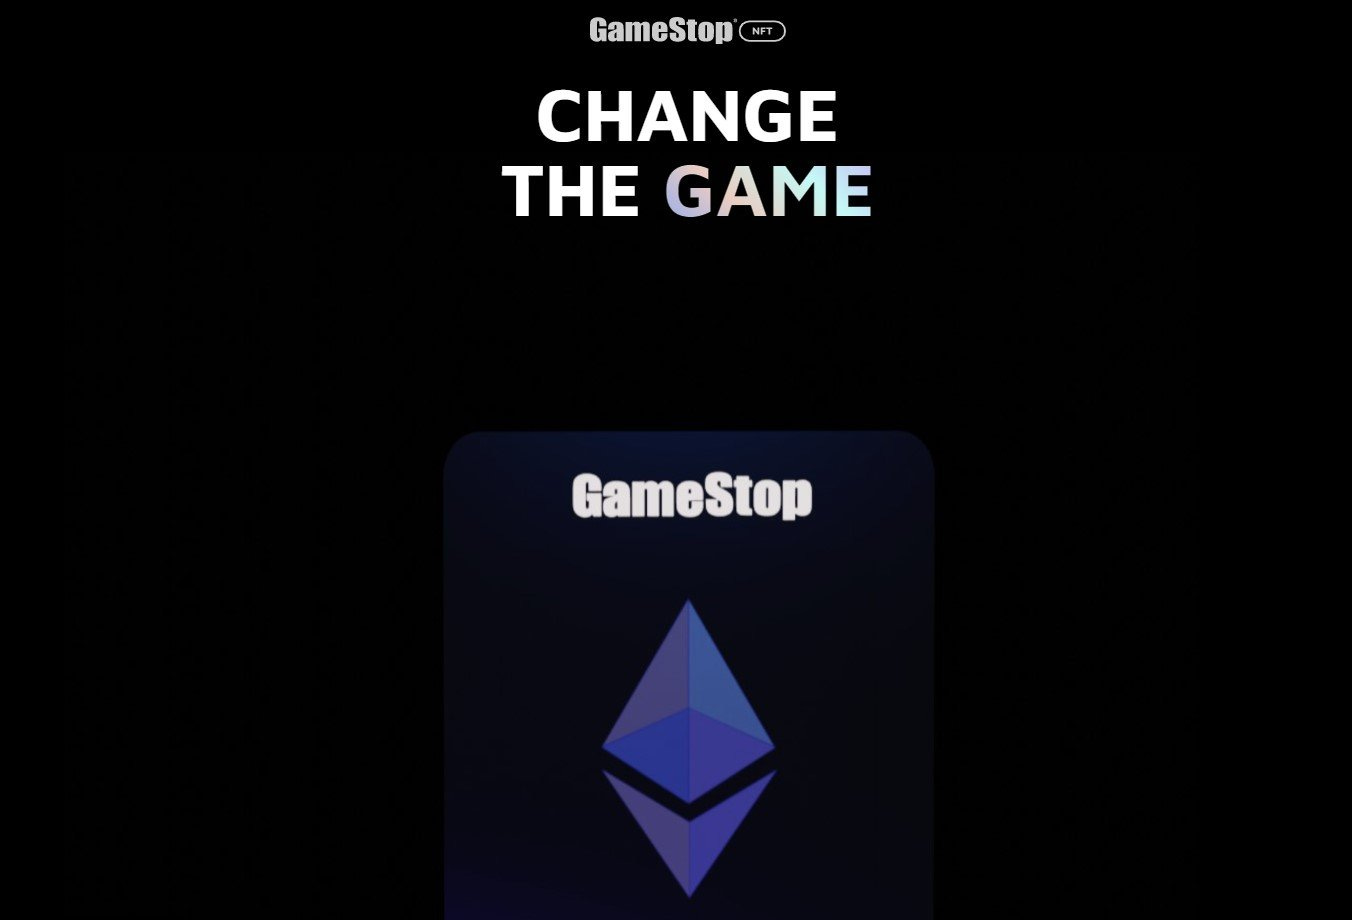 screenshot of Gamestop NFT marketplace website featuring motto "Change The Game"